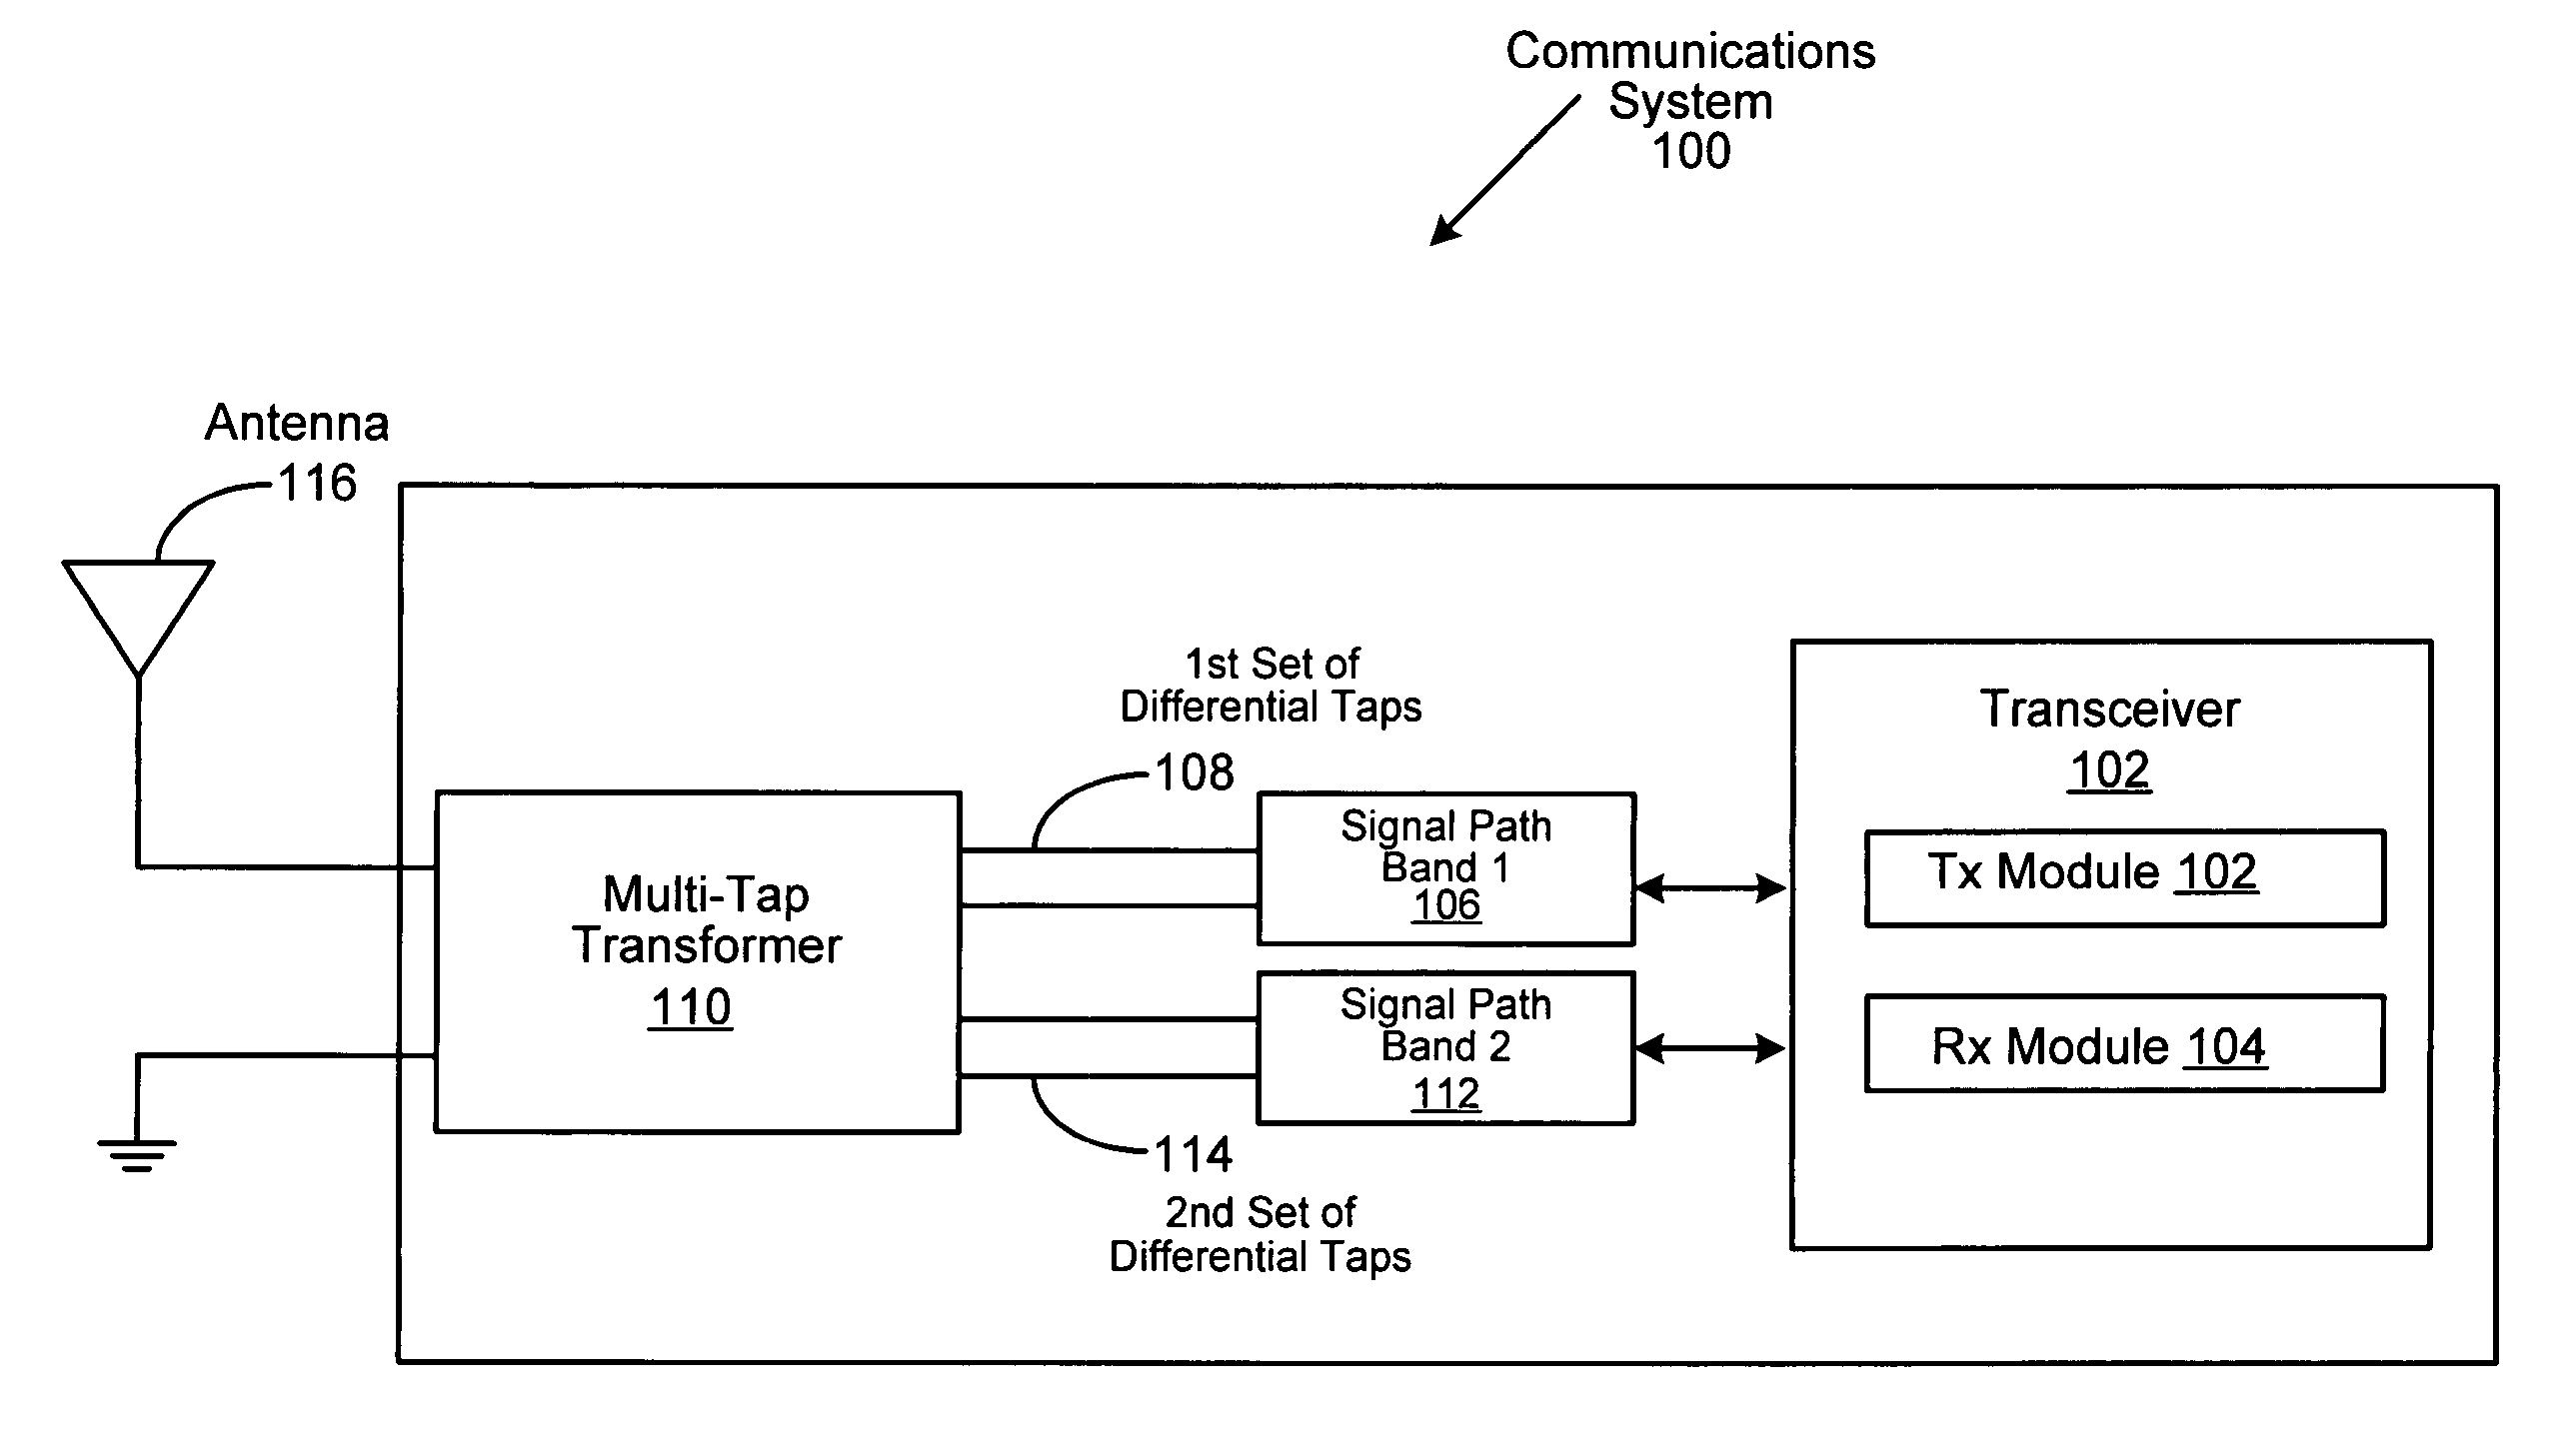 Transformer-based multi-band RF front-end architecture